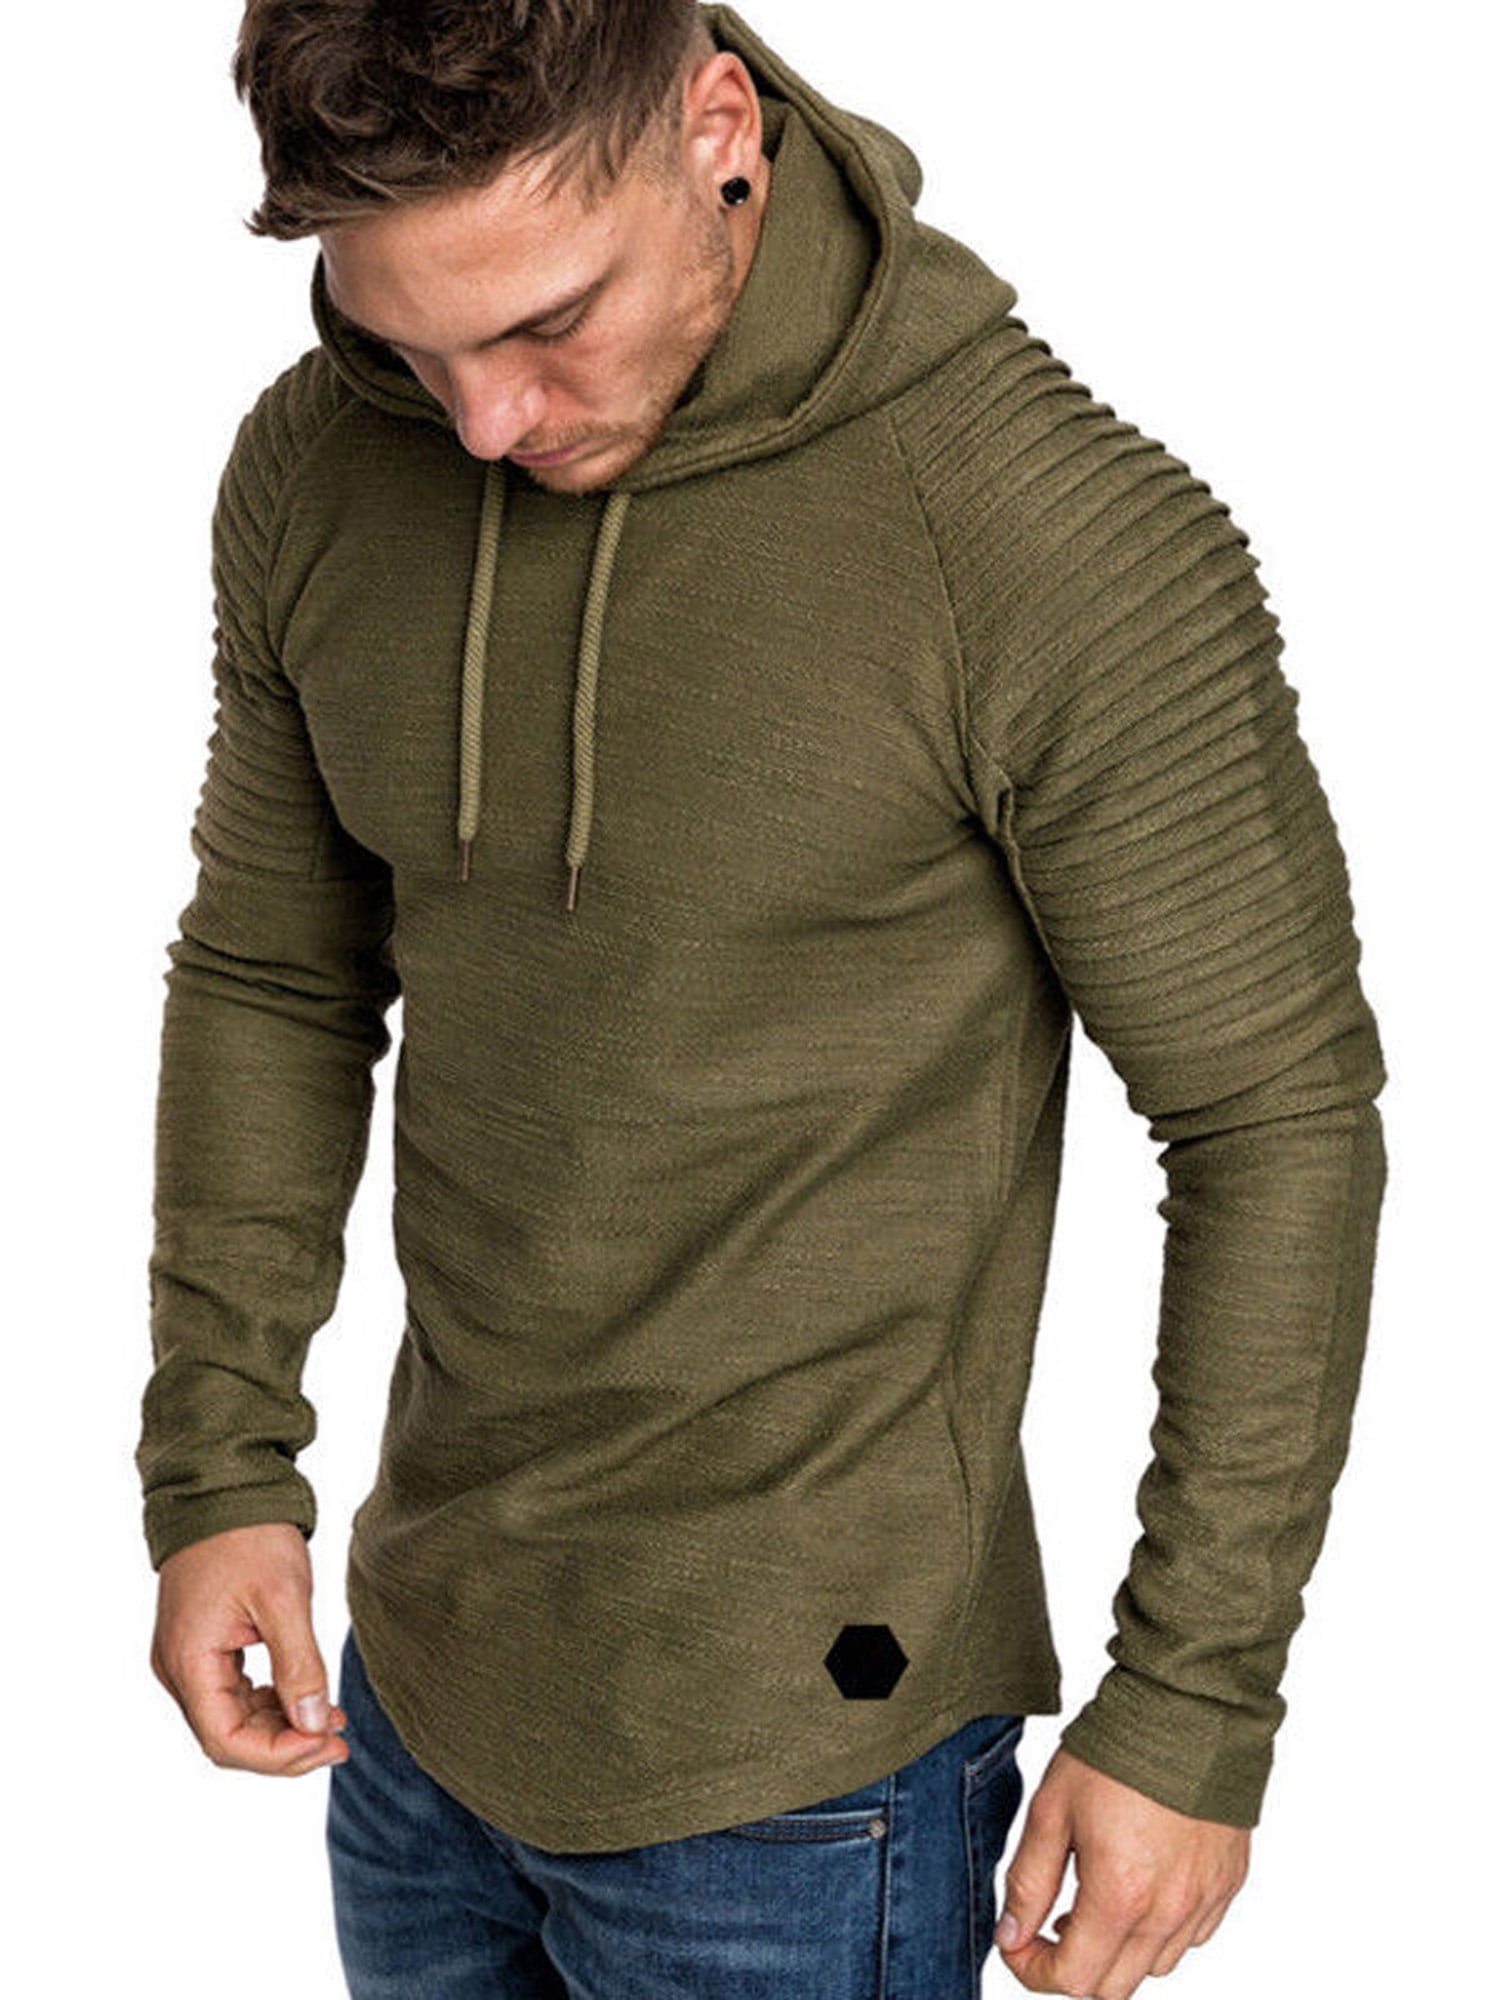 WUAI Mens Lightweight Jacket Hoodie Casual Sweatshirt Slim Fit Solid Color with Front Pocket Outwear Tops 